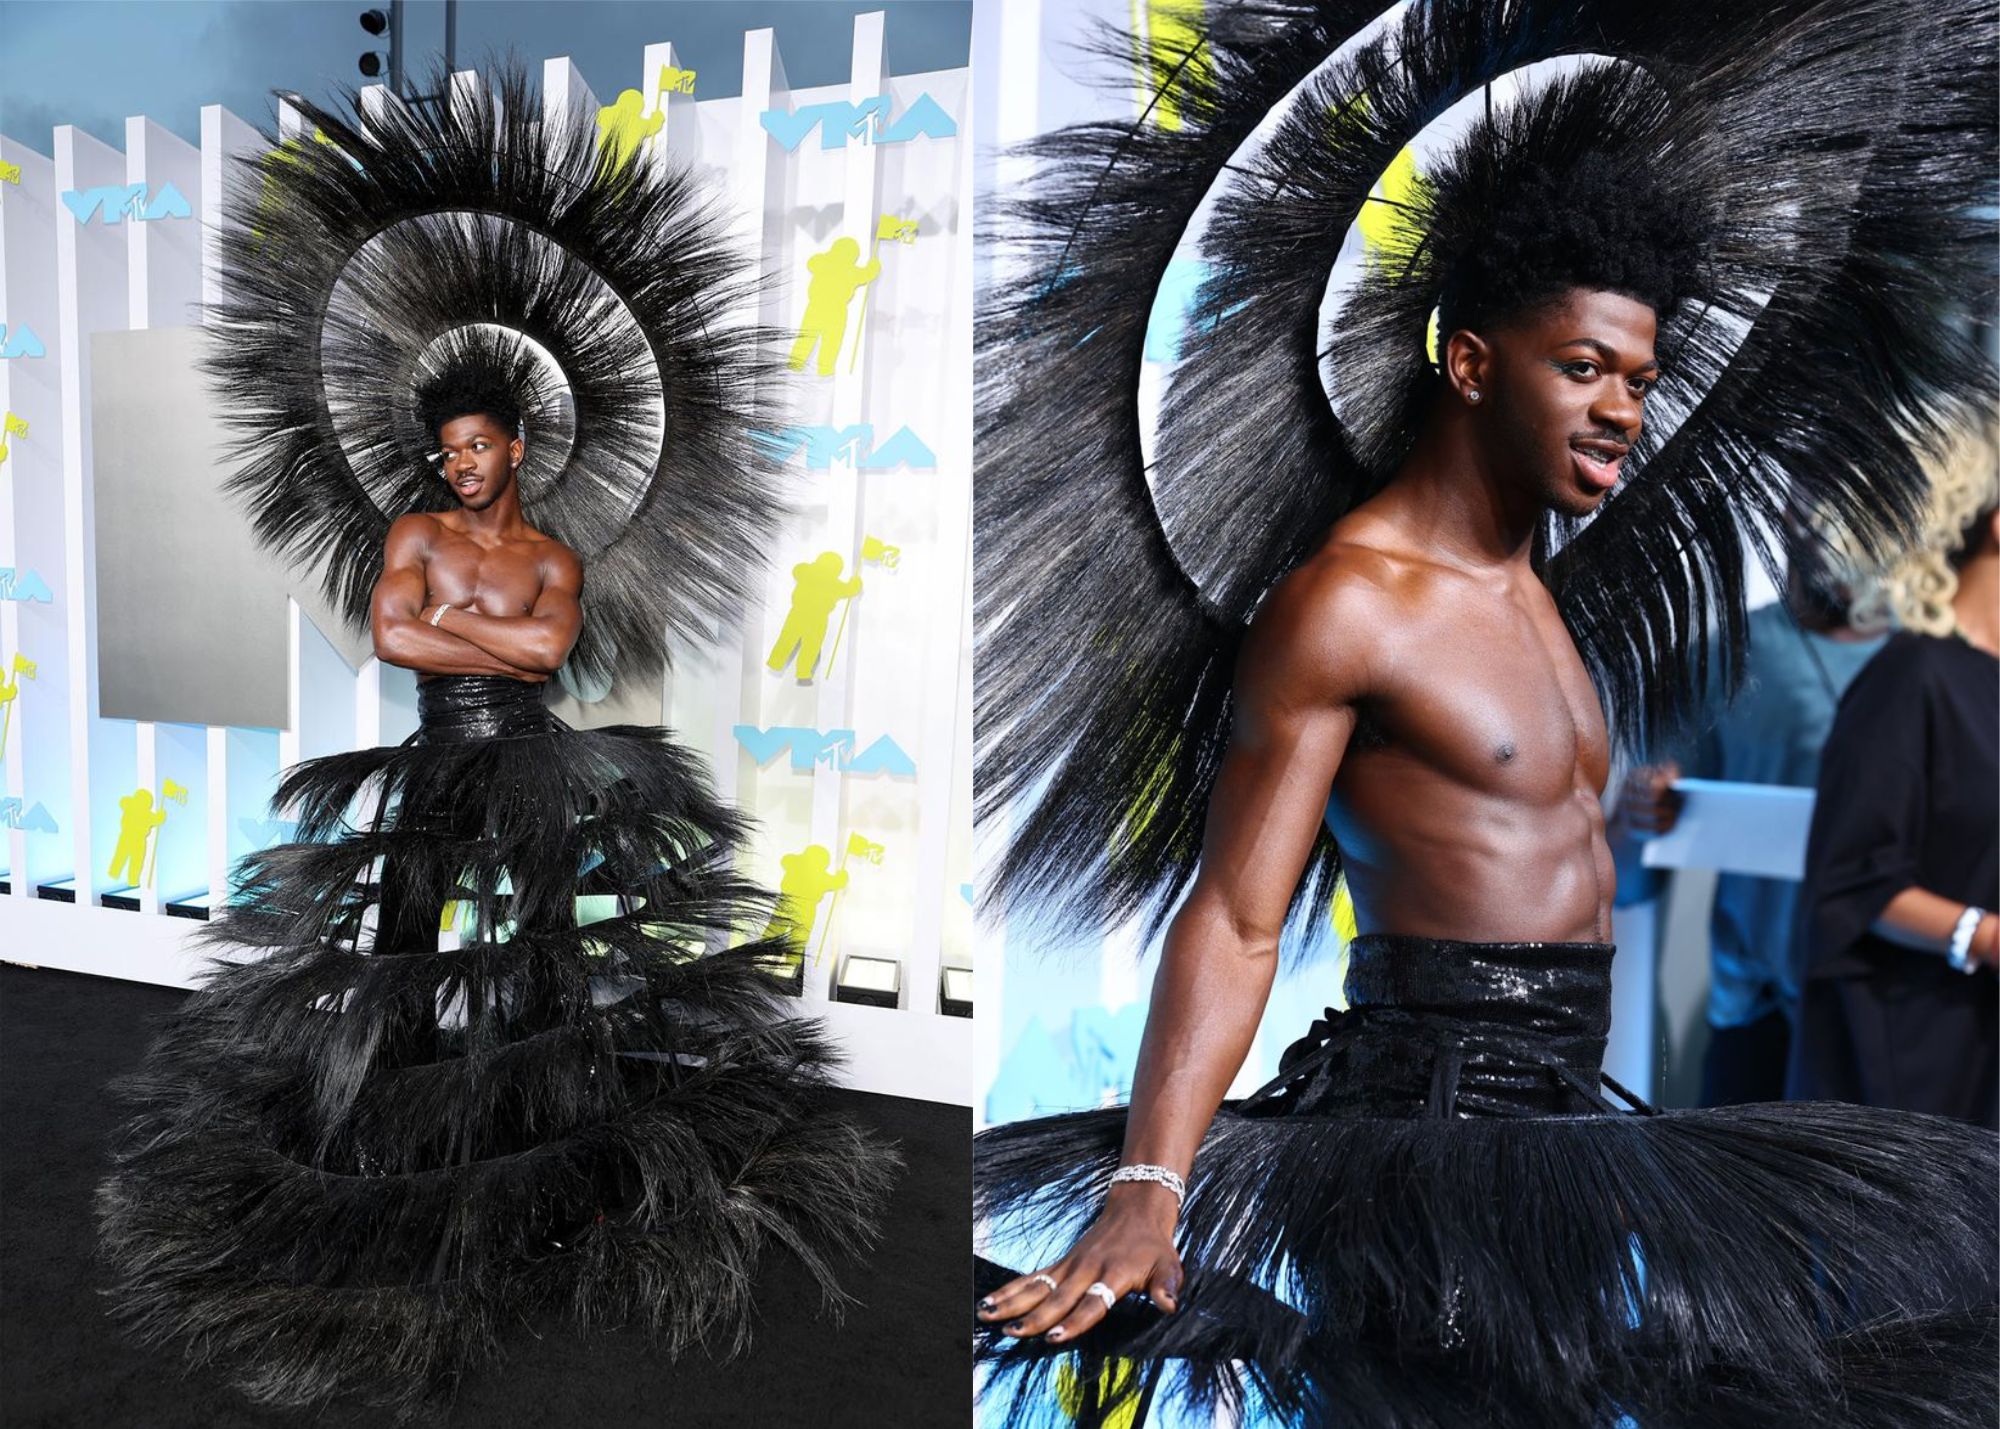 Montero Lamar Hill with the stage name known as Lil Nas X wears a black feathered outfit and headpiece